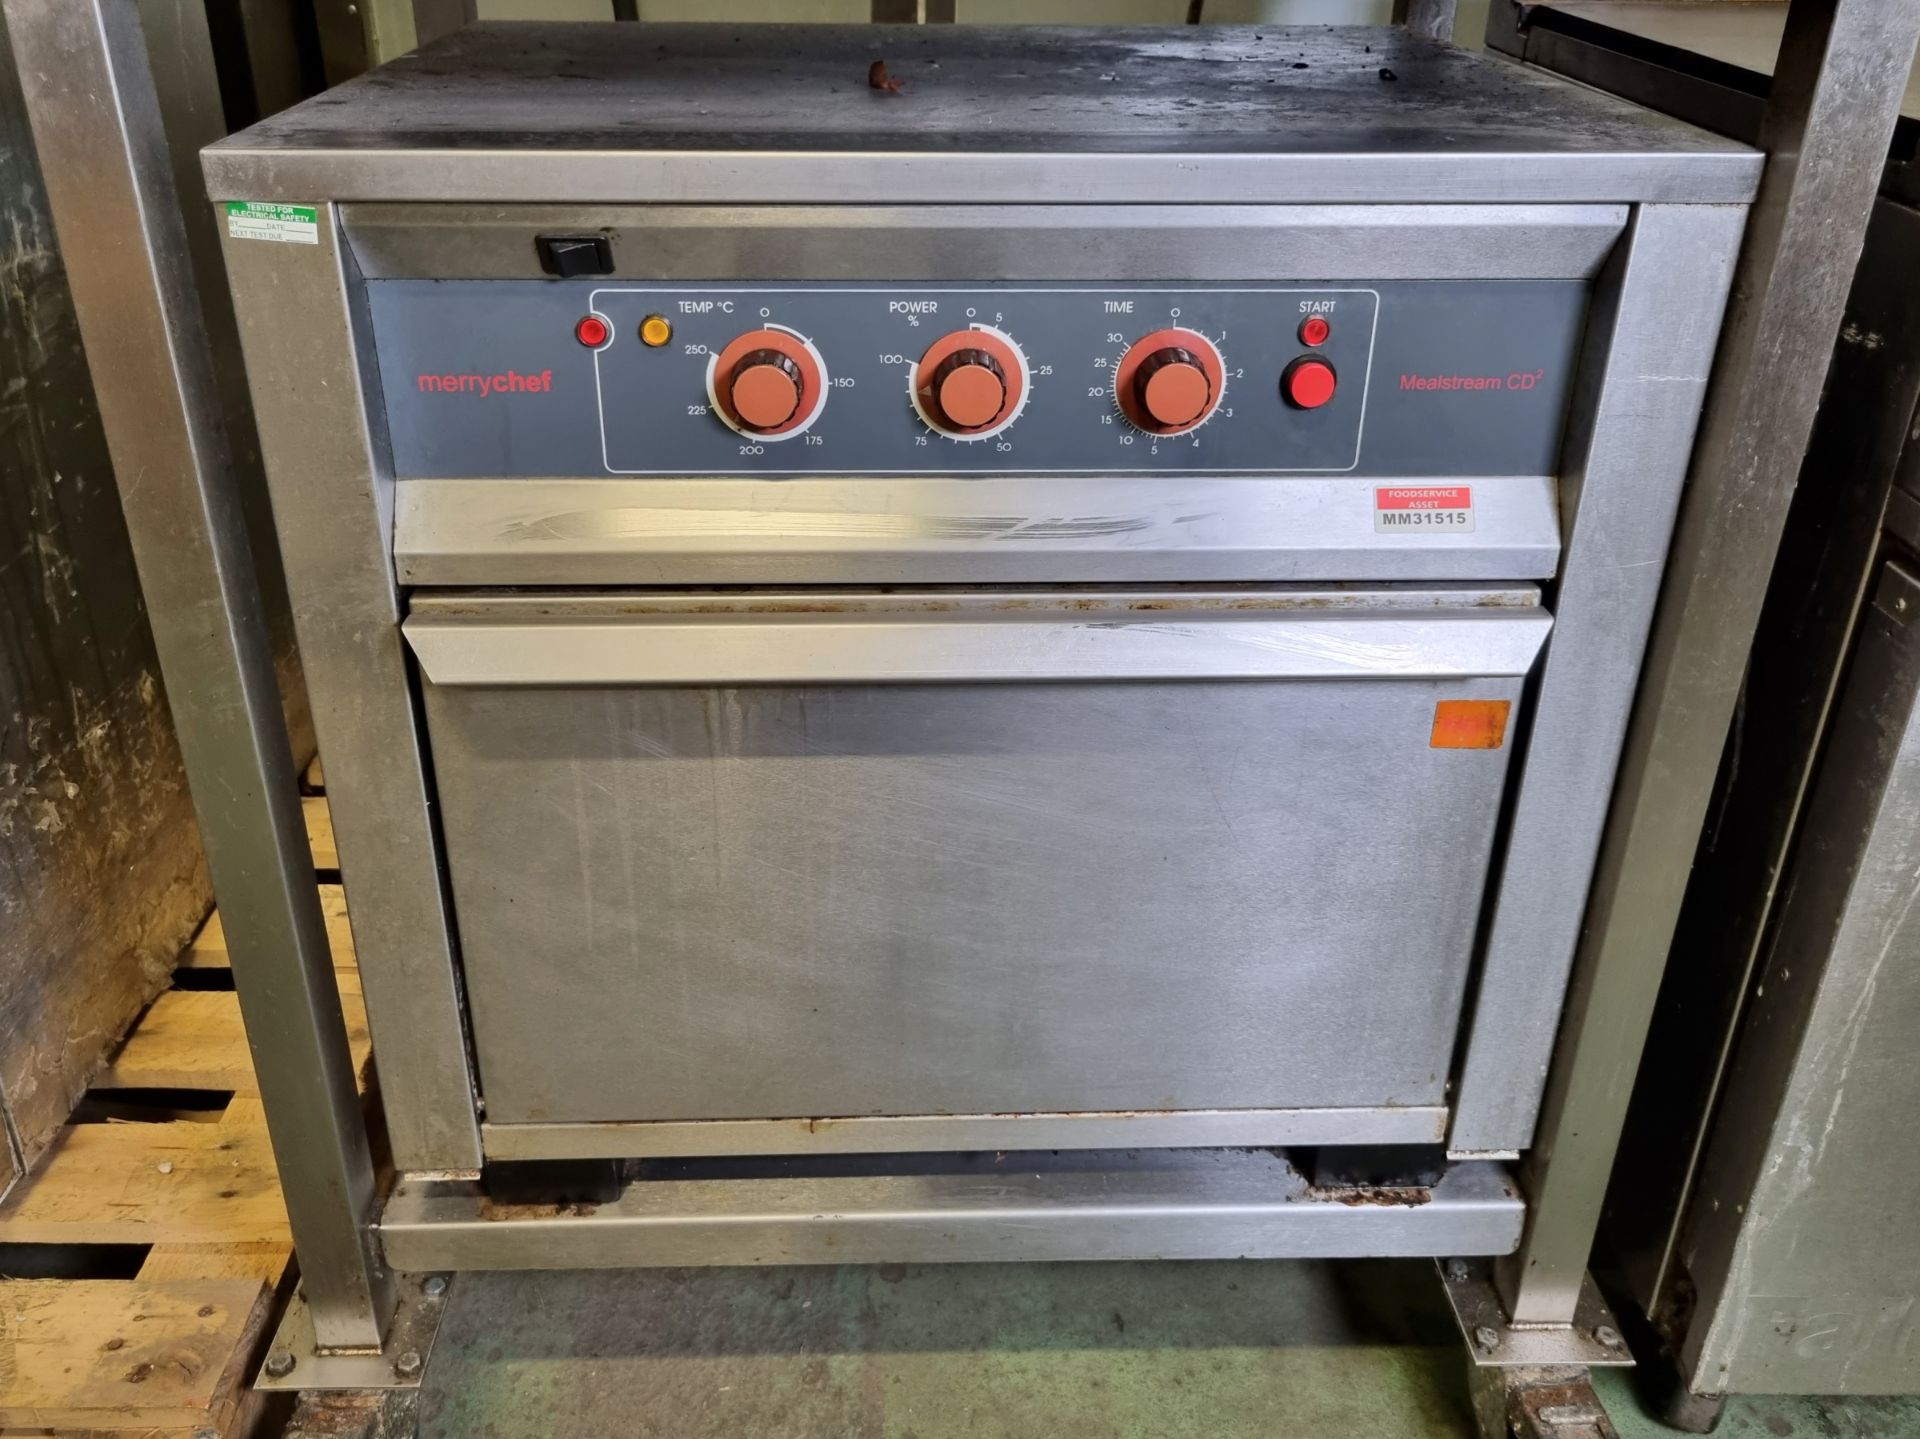 Merrychef CTM3-CD2 combination oven with trolley - W 880 x D 730 x H 1020mm - Image 3 of 5